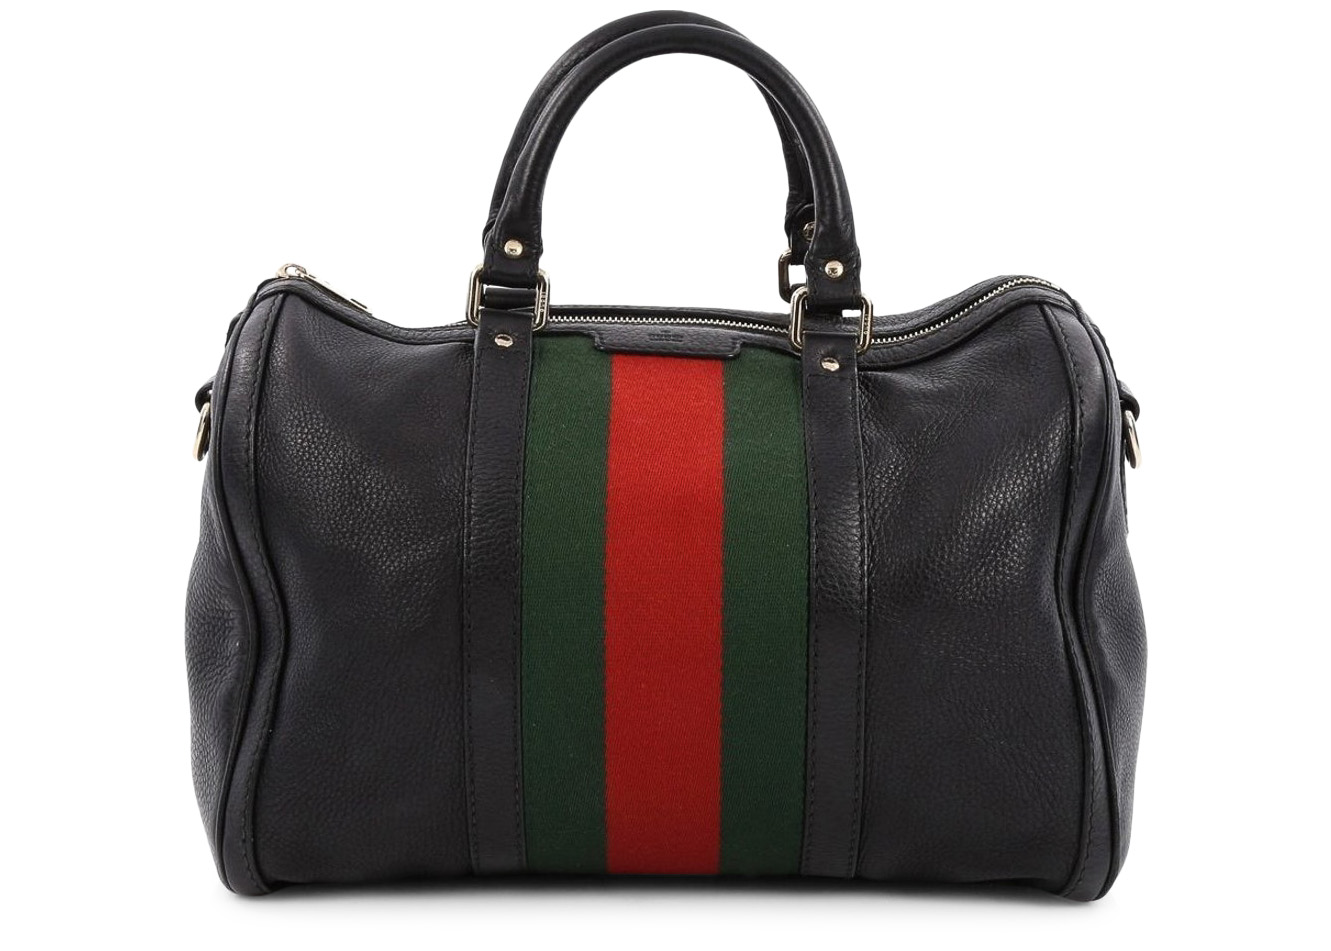 gucci black and red bag